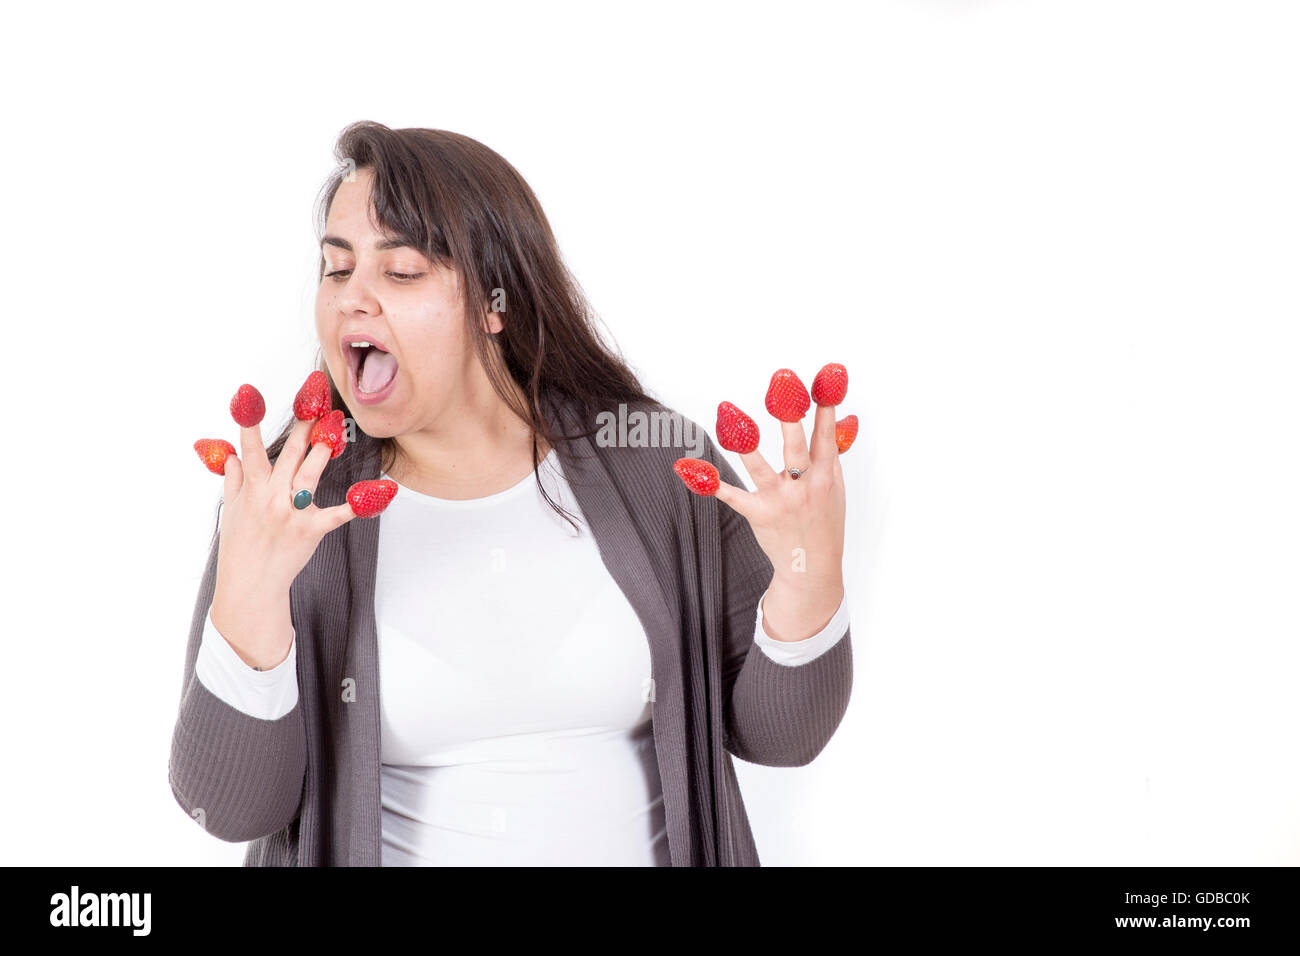 fat woman holding strawberries on fingers and look funny Stock Photo